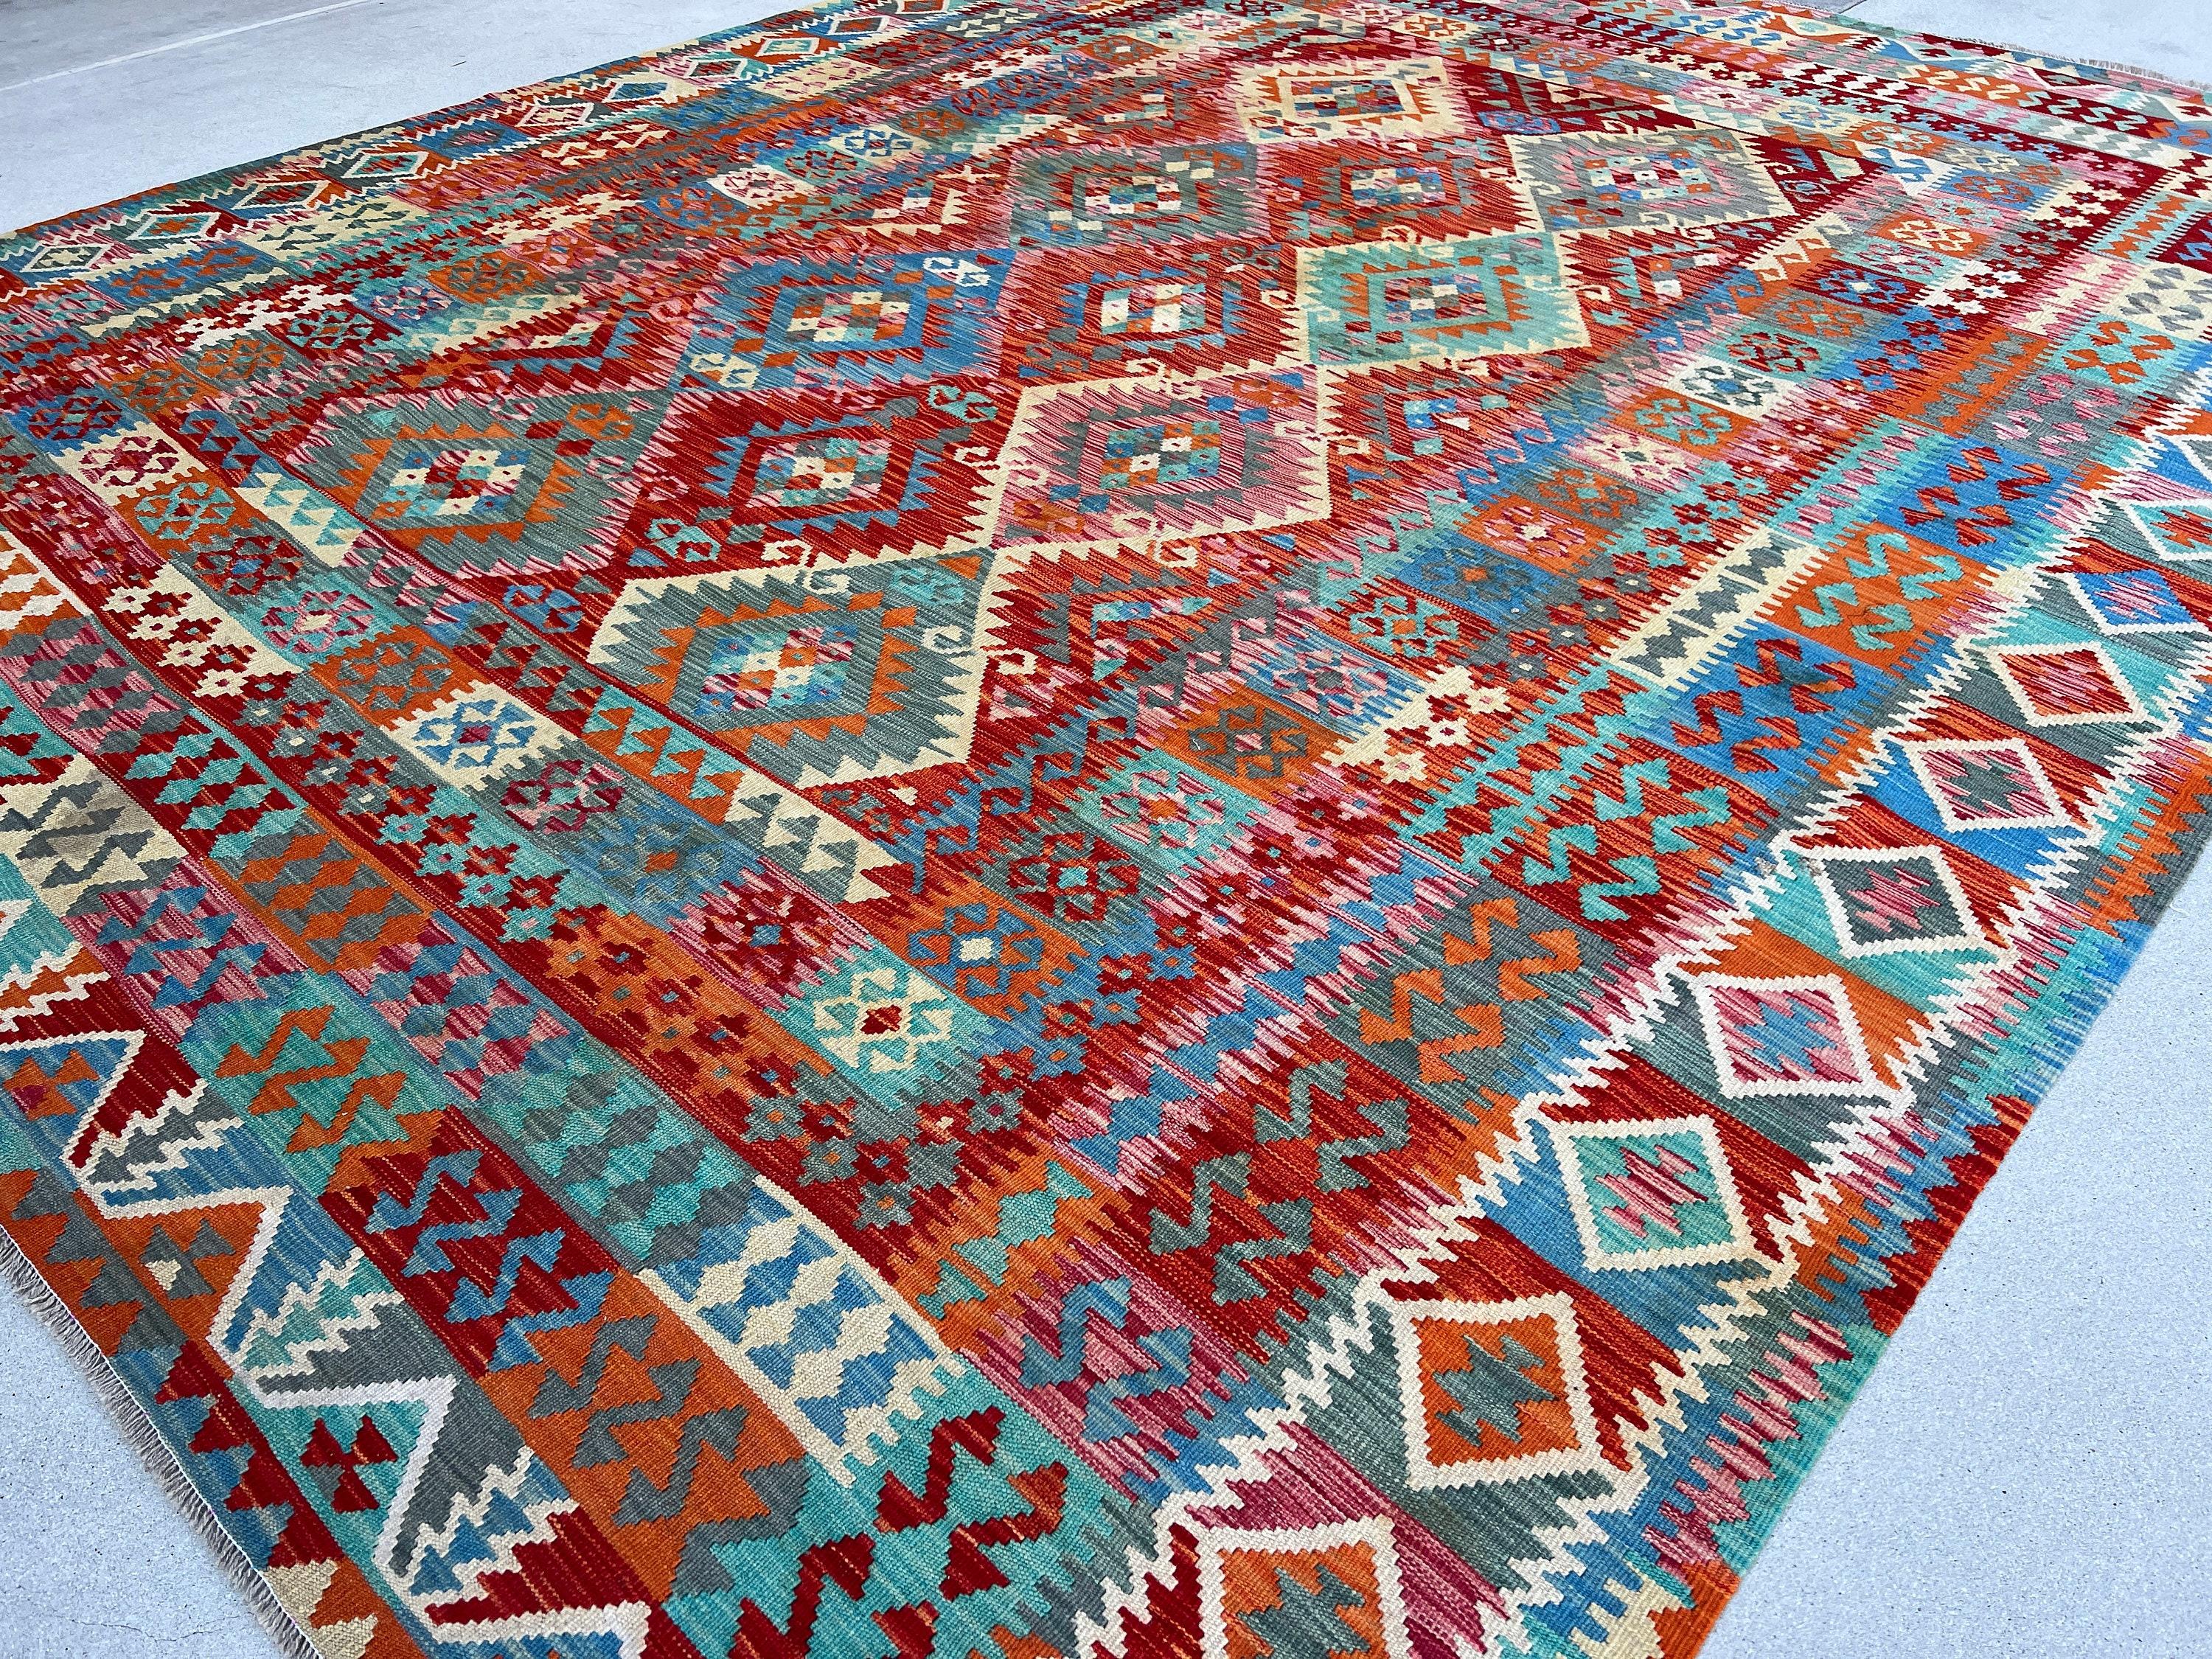 Contemporary 10x13 Hand-Knotted Afghan Kilim Rug Premium Hand-Spun Afghan Wool Fair Trade For Sale